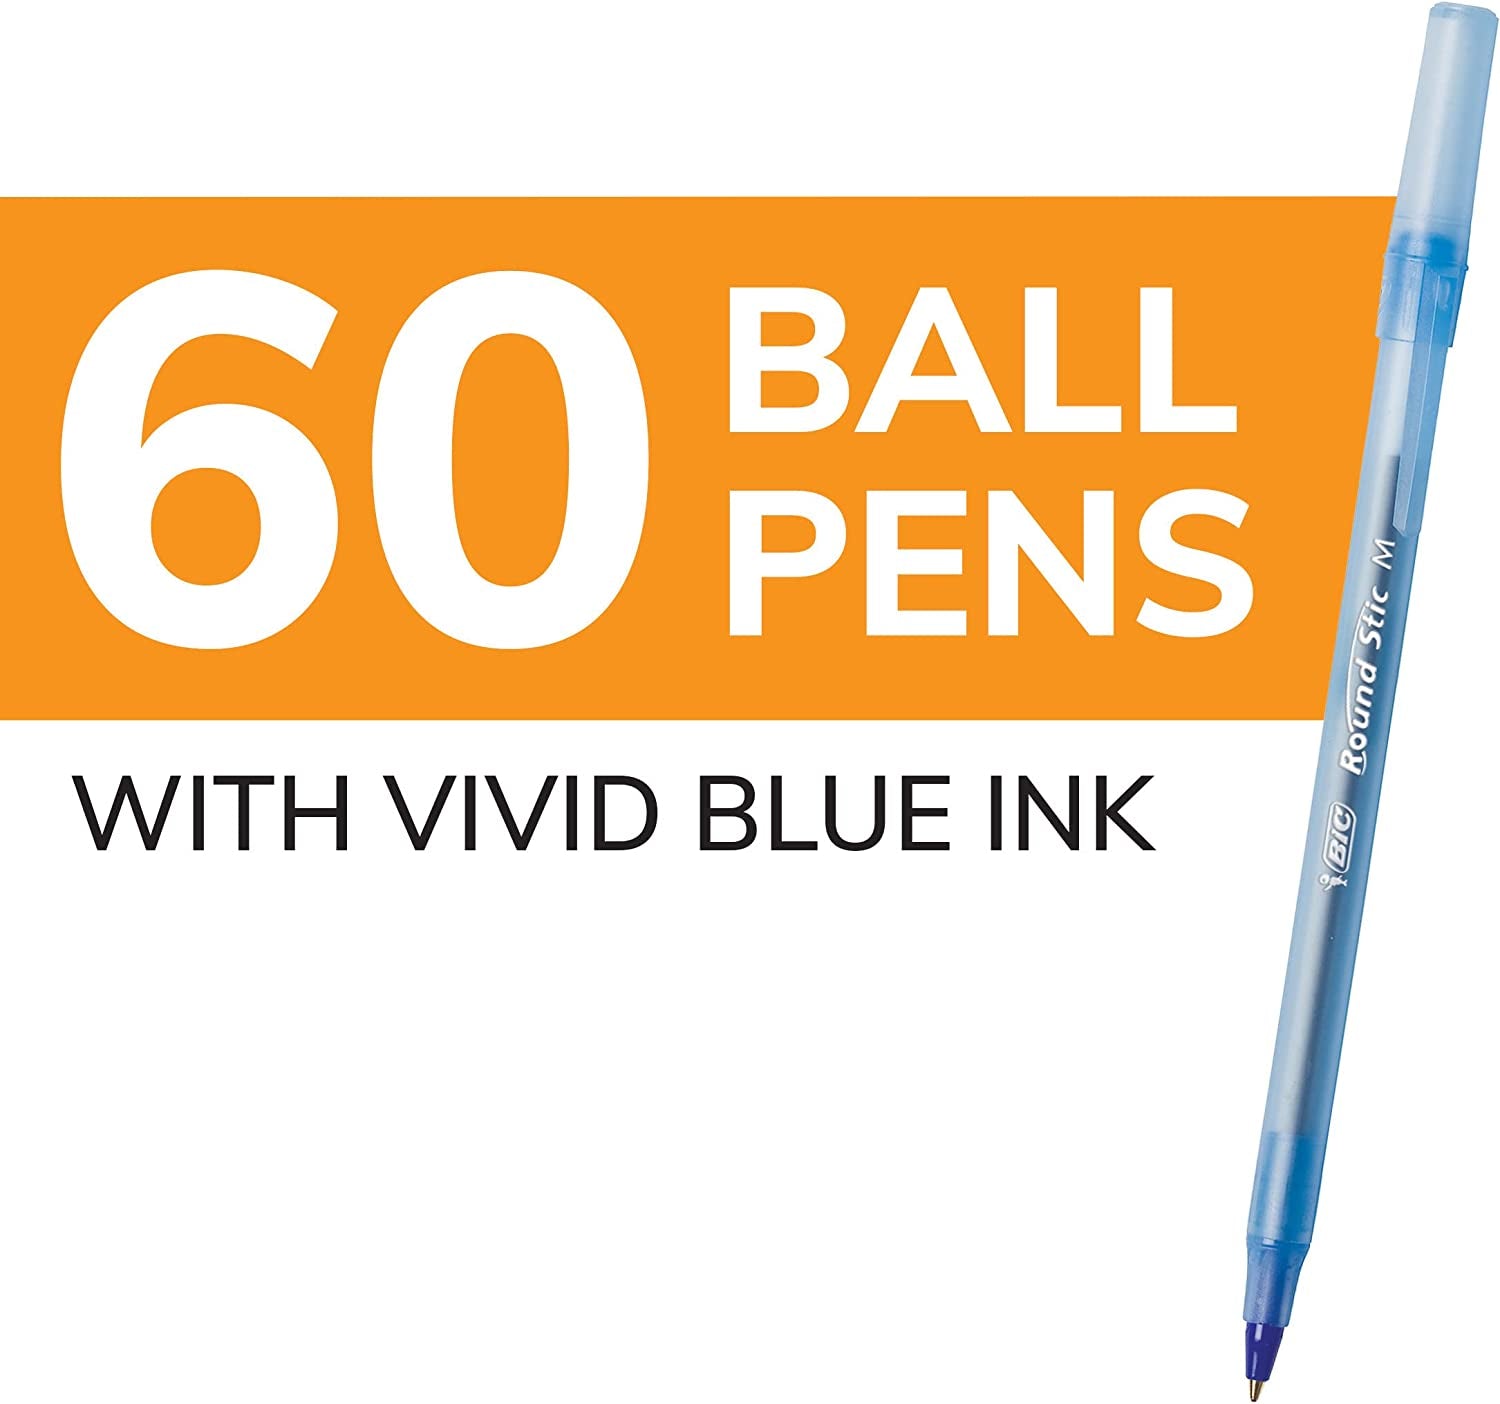 round Stic Xtra Life Blue Ballpoint Pens, Medium Point (1.0Mm), 60-Count Pack of Bulk Pens, Flexible round Barrel for Writing Comfort, No. 1 Selling Ballpoint Pens